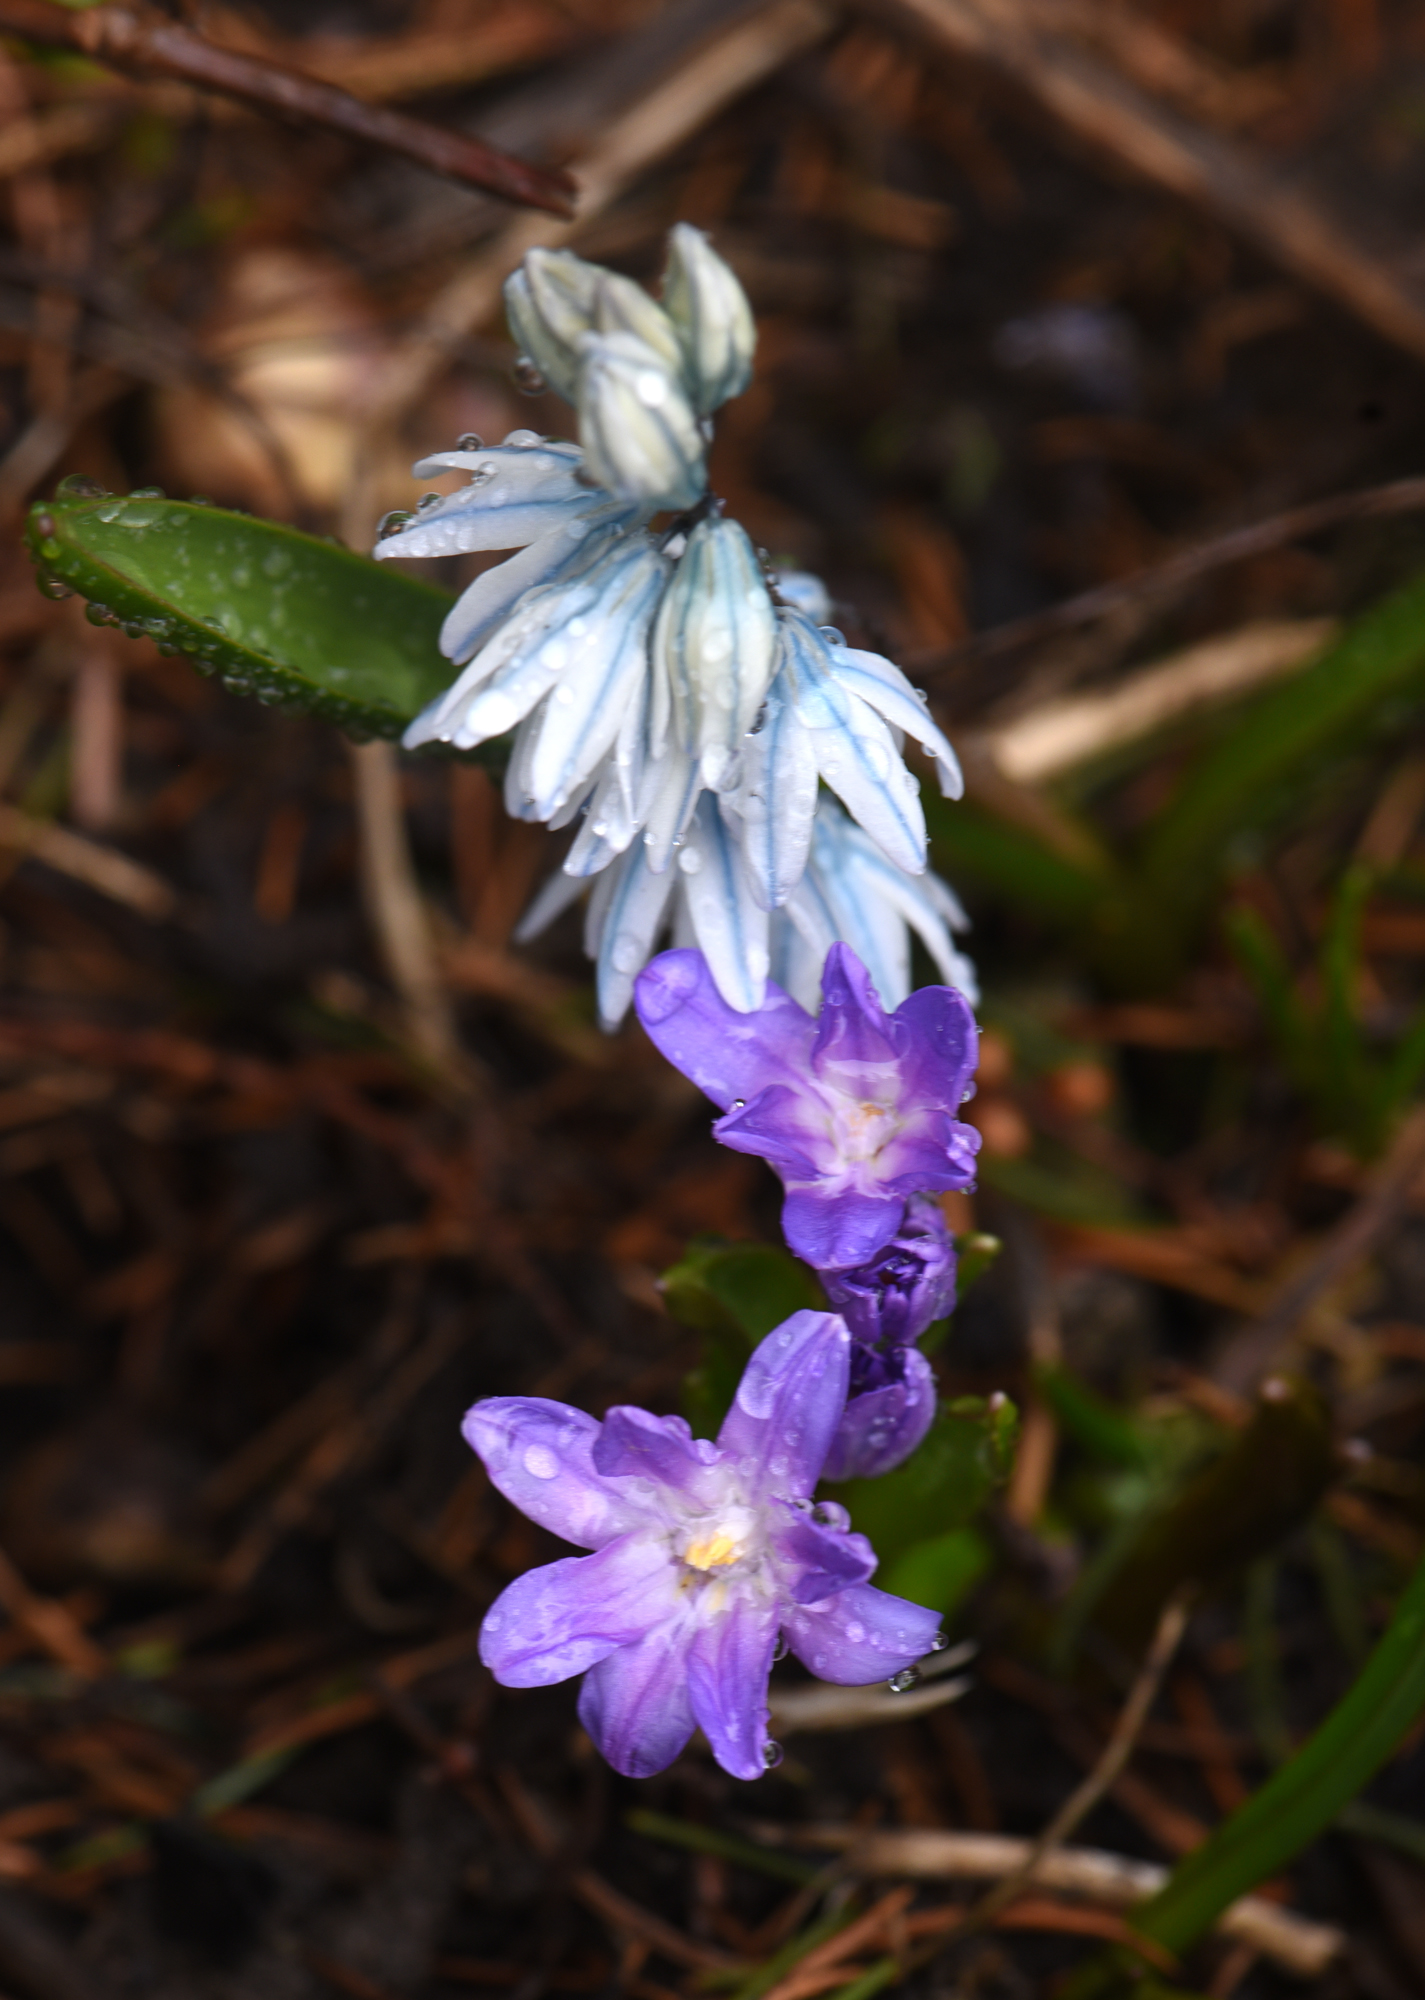 The blue flowers are puschkenia and the purple are 'Violet Beauty' glory of snow. These are some of the spring blooming bulbs that can be ordered right now. They make a great combination and are deer resistant.